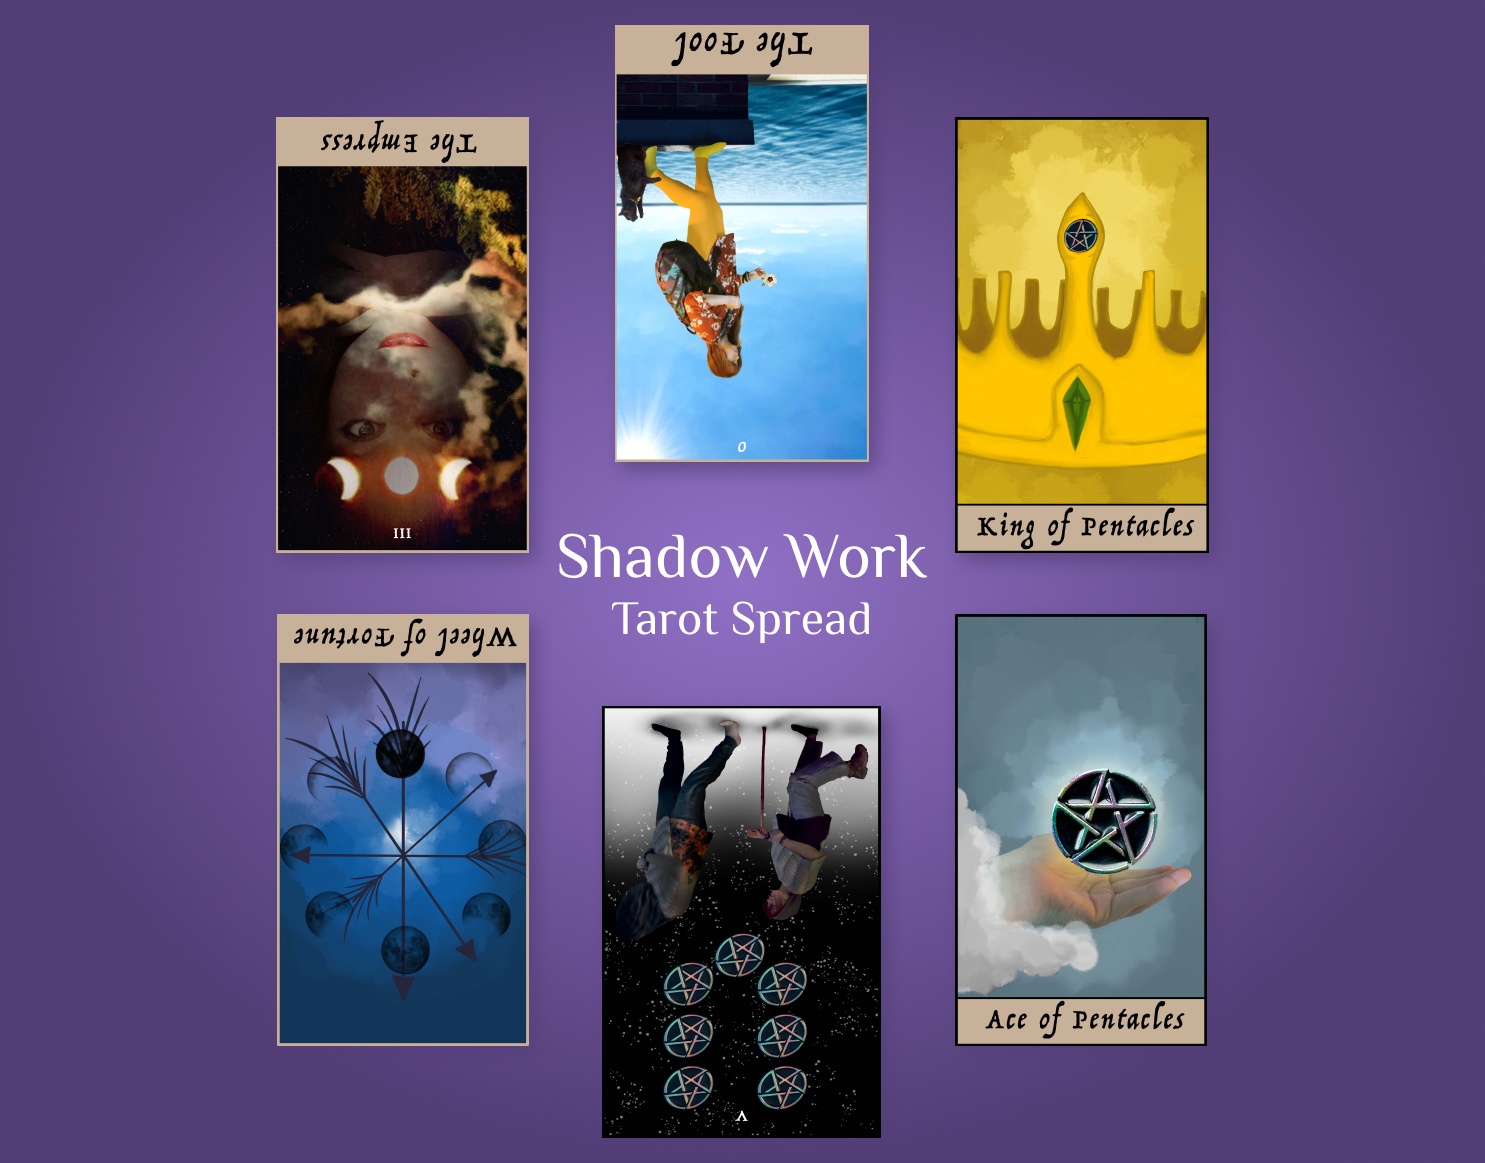 image of 6 tarot cards with text "shadow work"